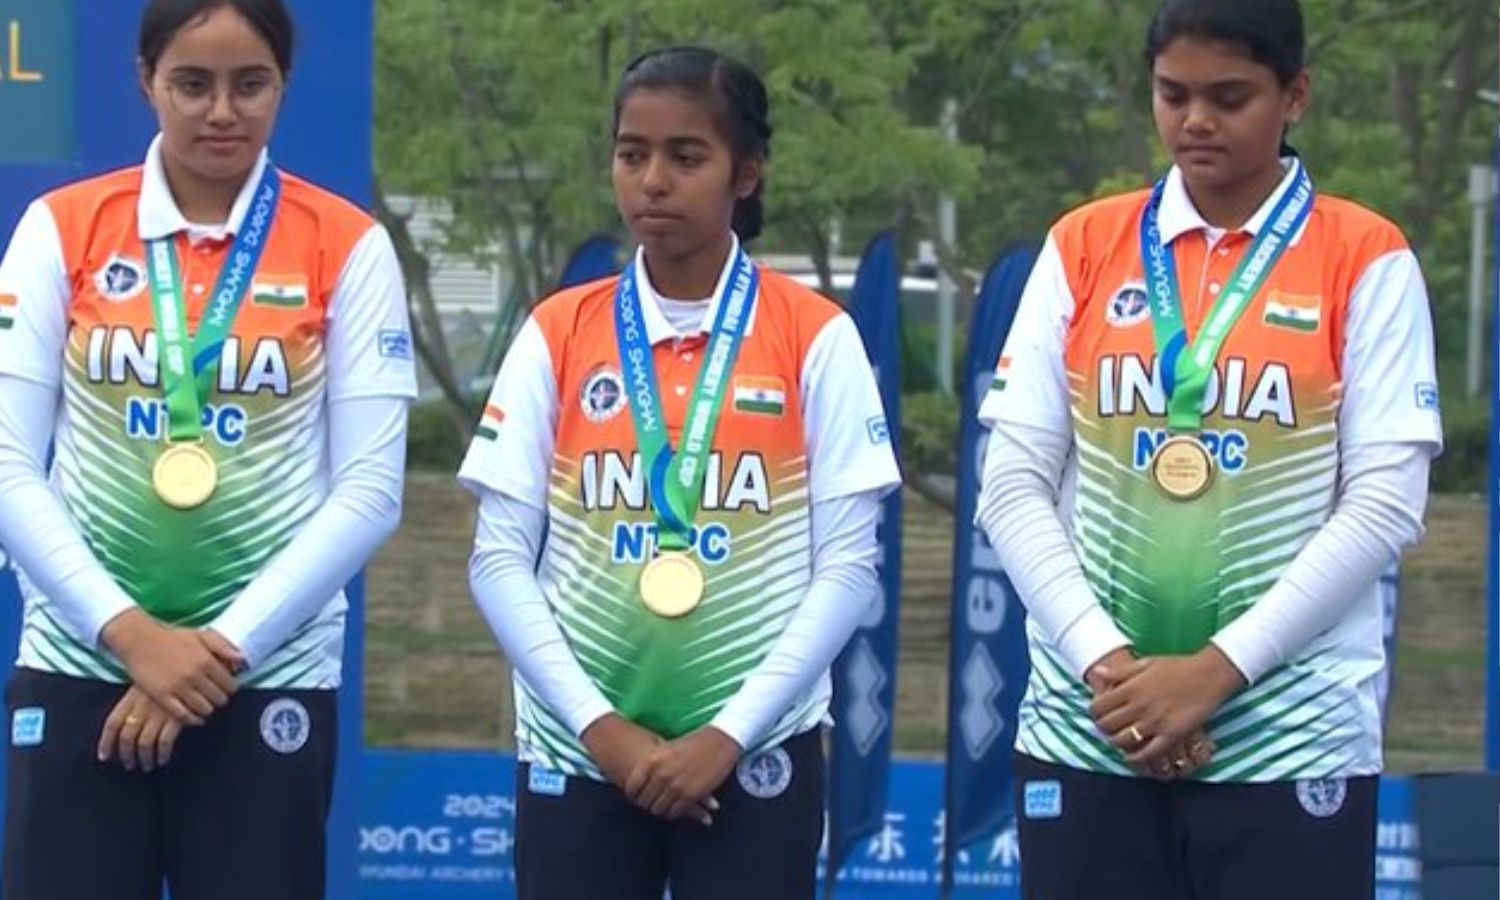 Indian archers win 3 gold to clean sweep compound team events